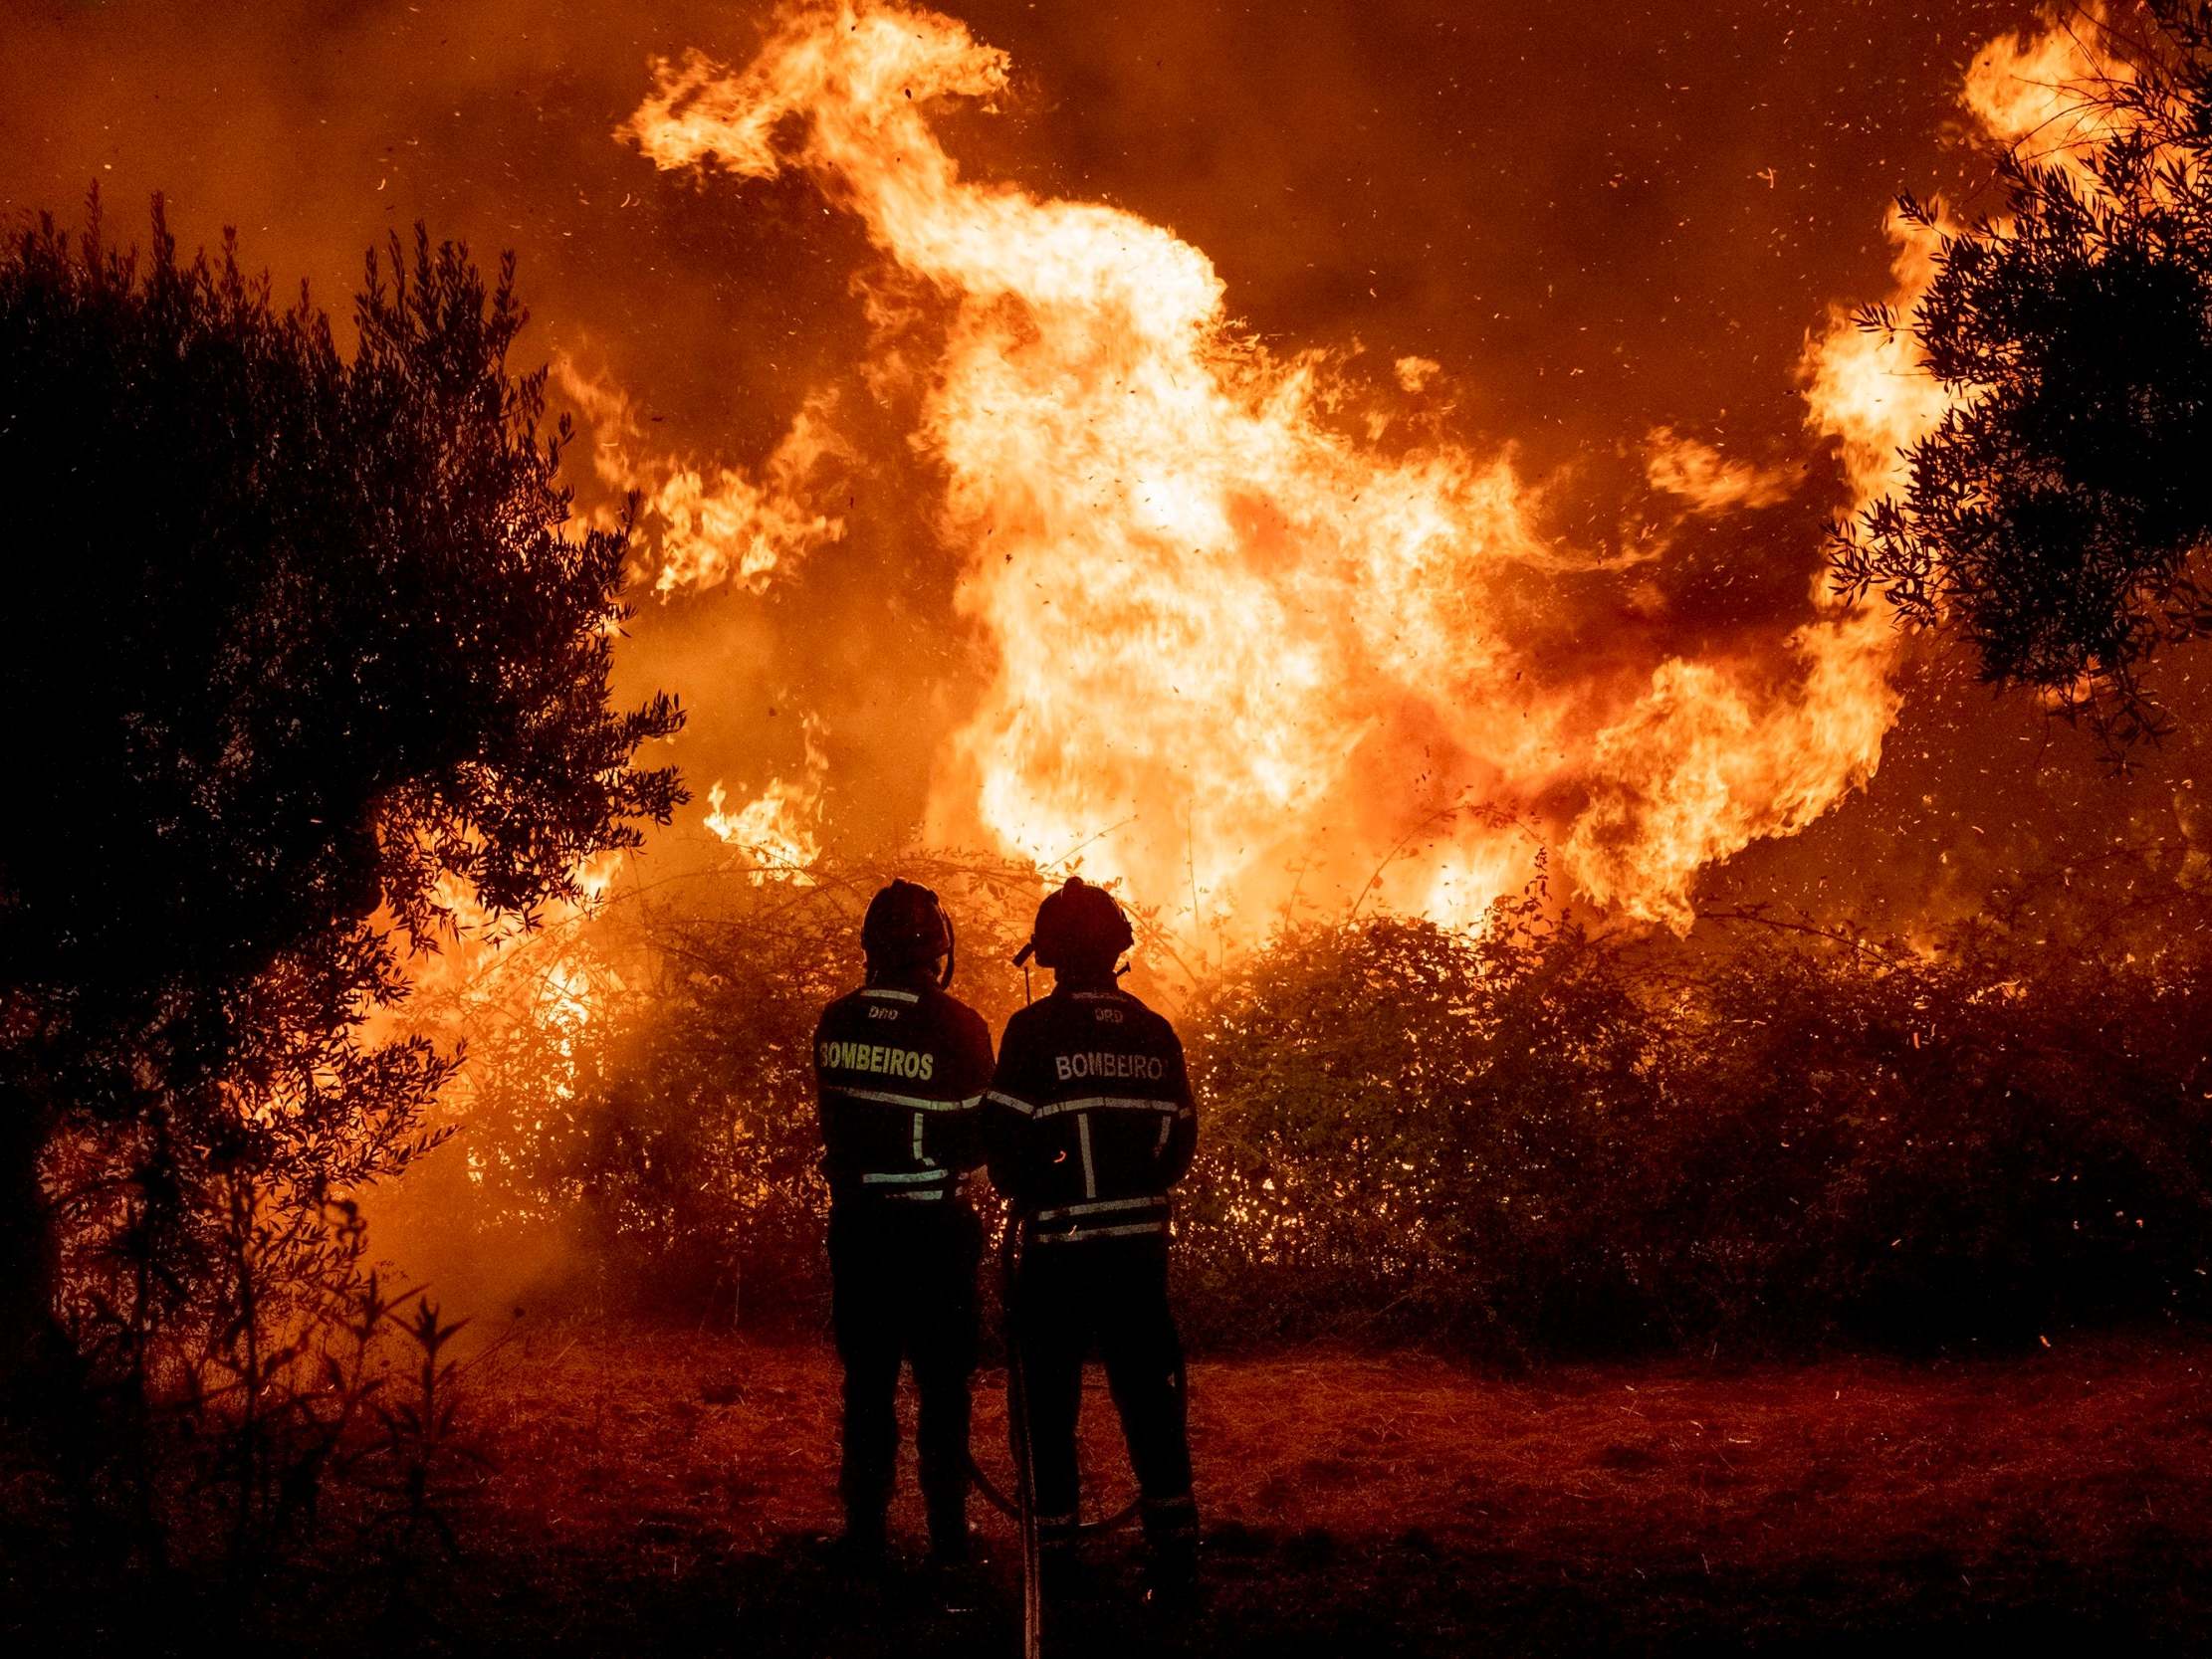 Firefighters tackling a wildfire in central Portugal on 21 July 2019